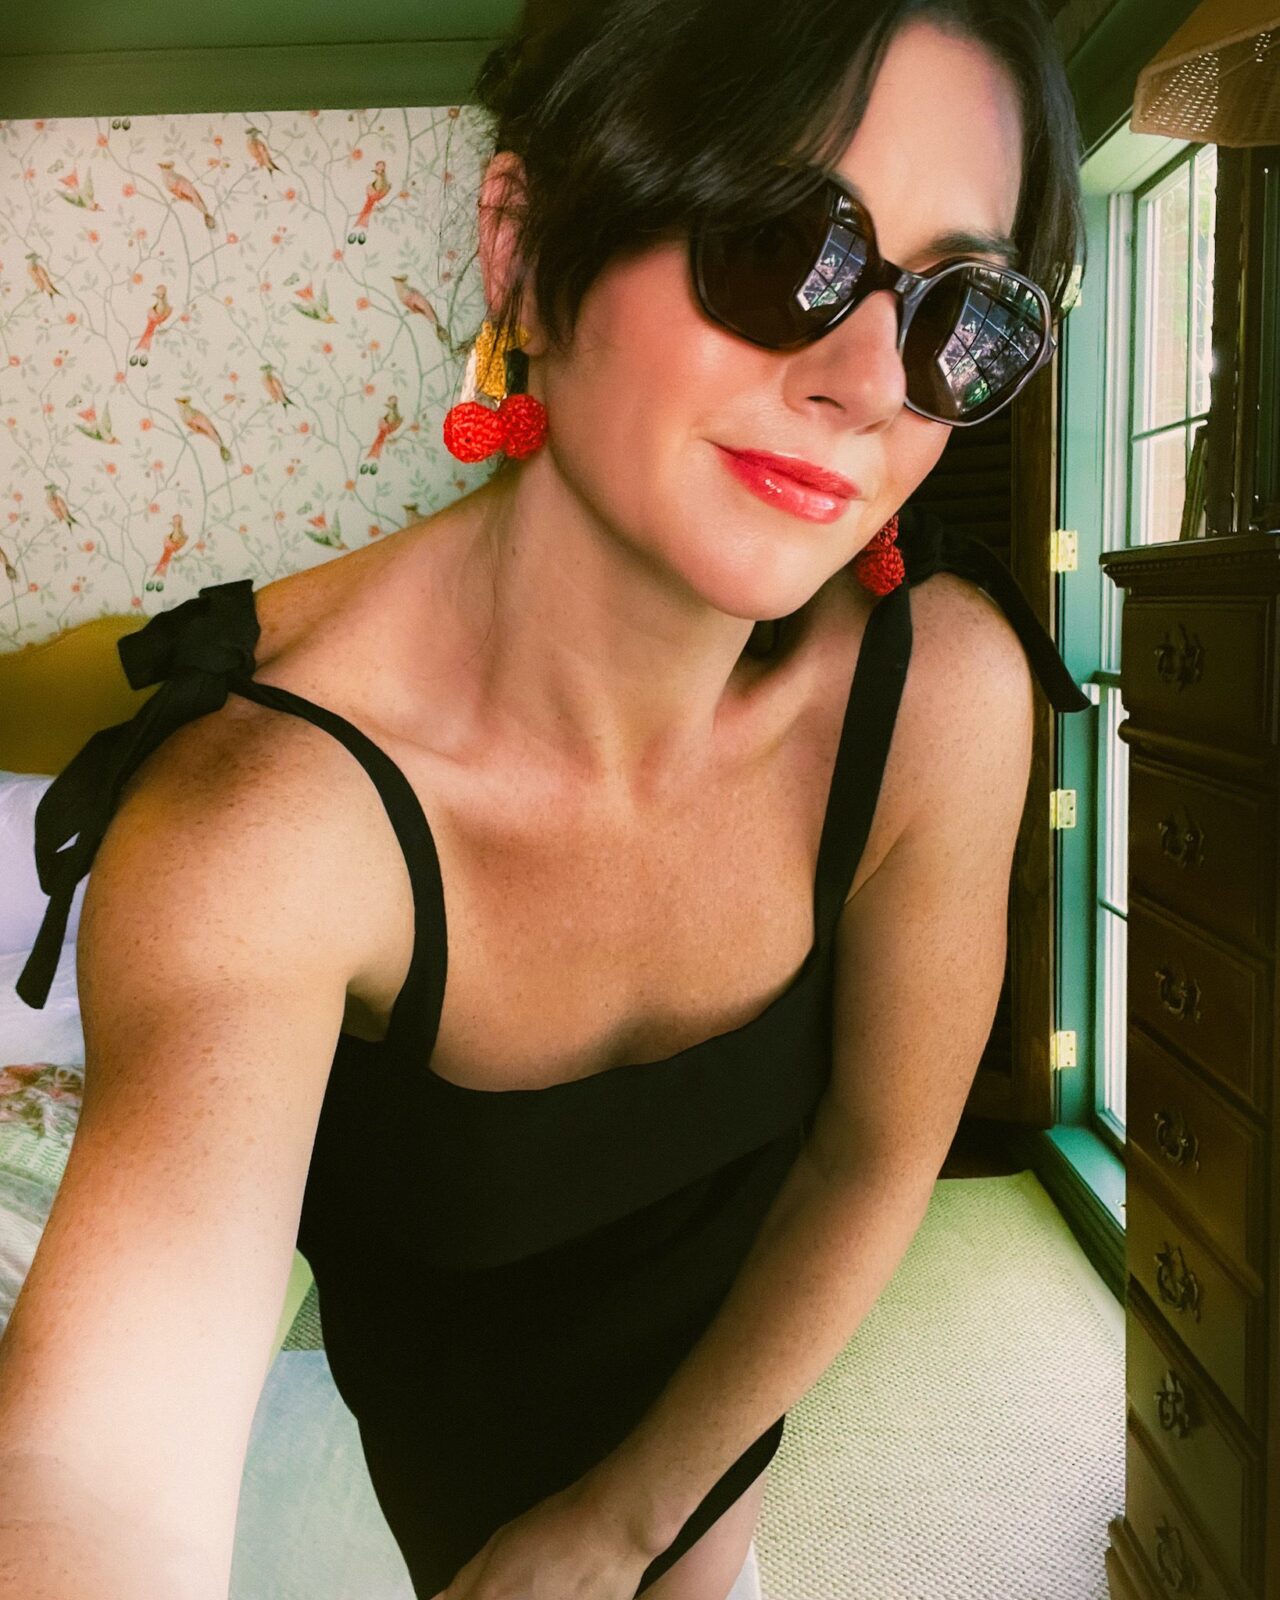 Woman wearing the perfect little black dress from Sézane, cherry-shaped earrings, and black sunglasses